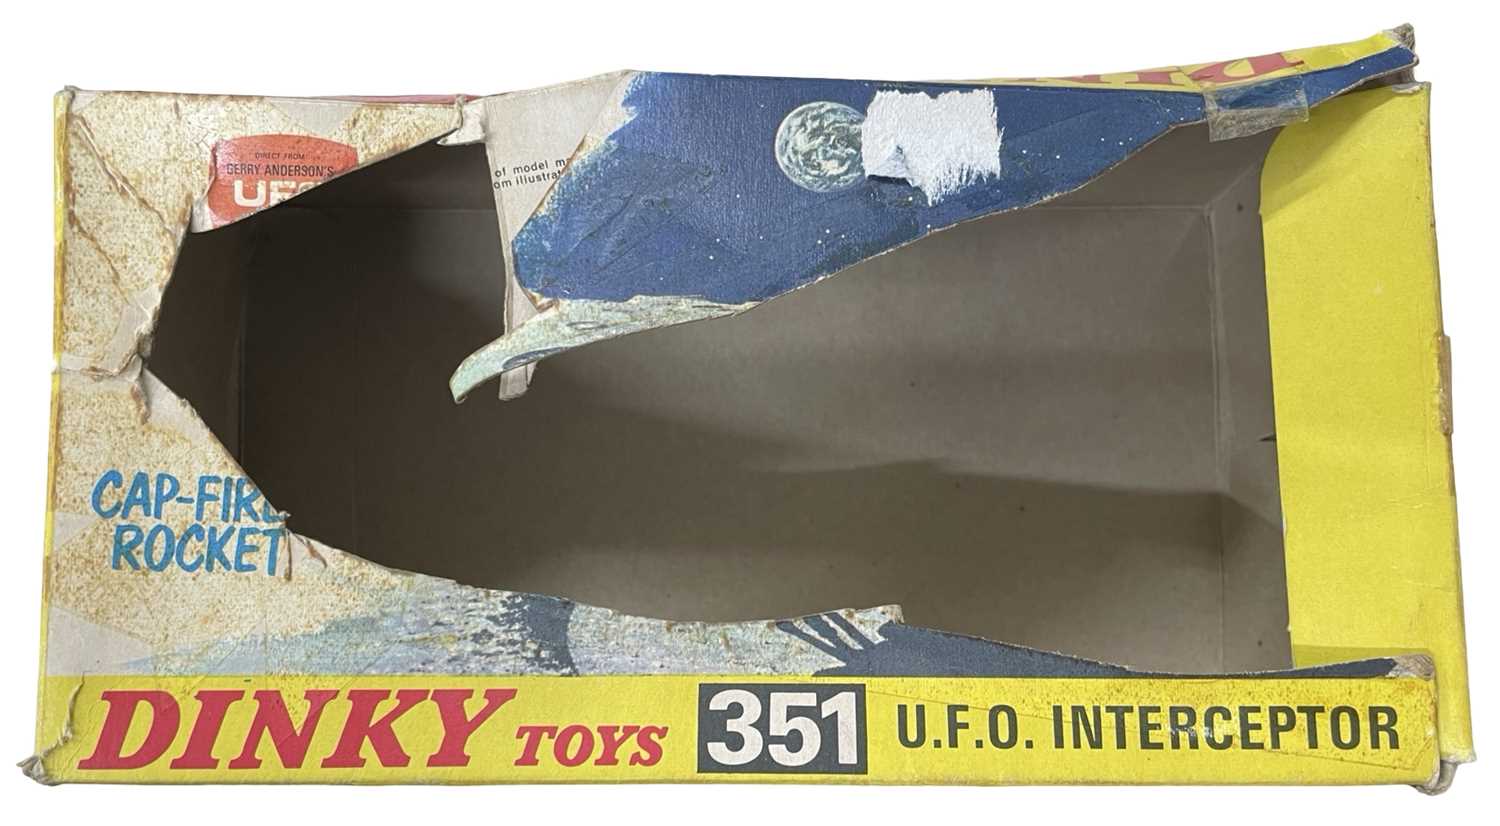 Three Dinky UFO (Gerry Anderson) toys, to include: - UFO Interceptor in original box (very damaged - Image 2 of 2